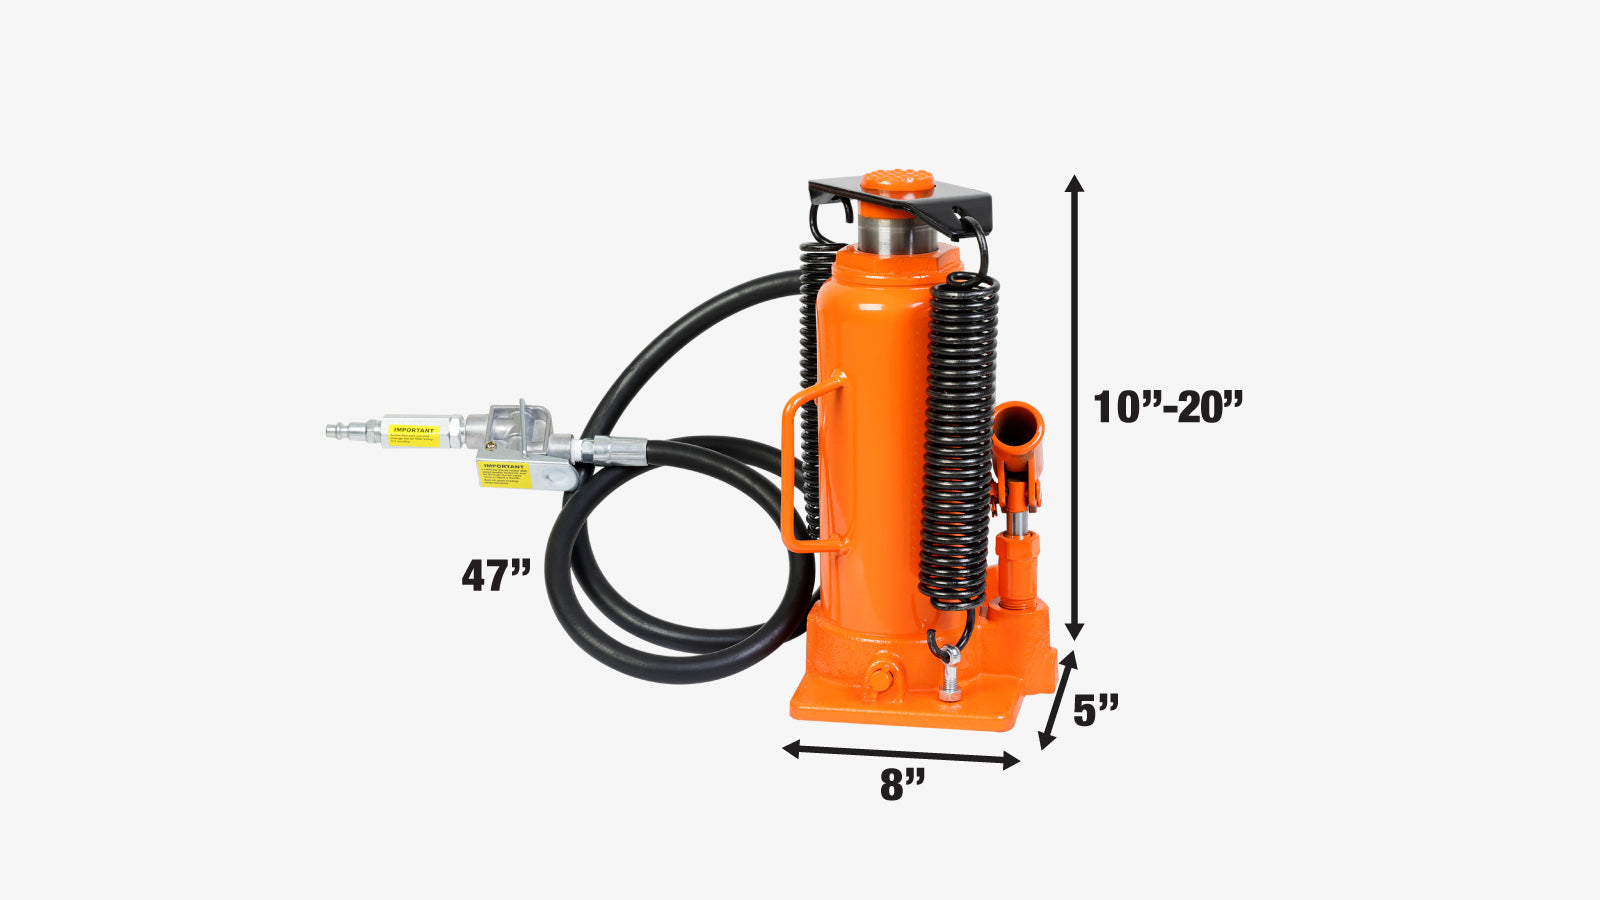 TMG Industrial 12 Ton Air Hydraulic Bottle Jack, Manual & Pneumatic Control, Double Springs, 20” Lift Height, TMG-AJA12-specifications-image